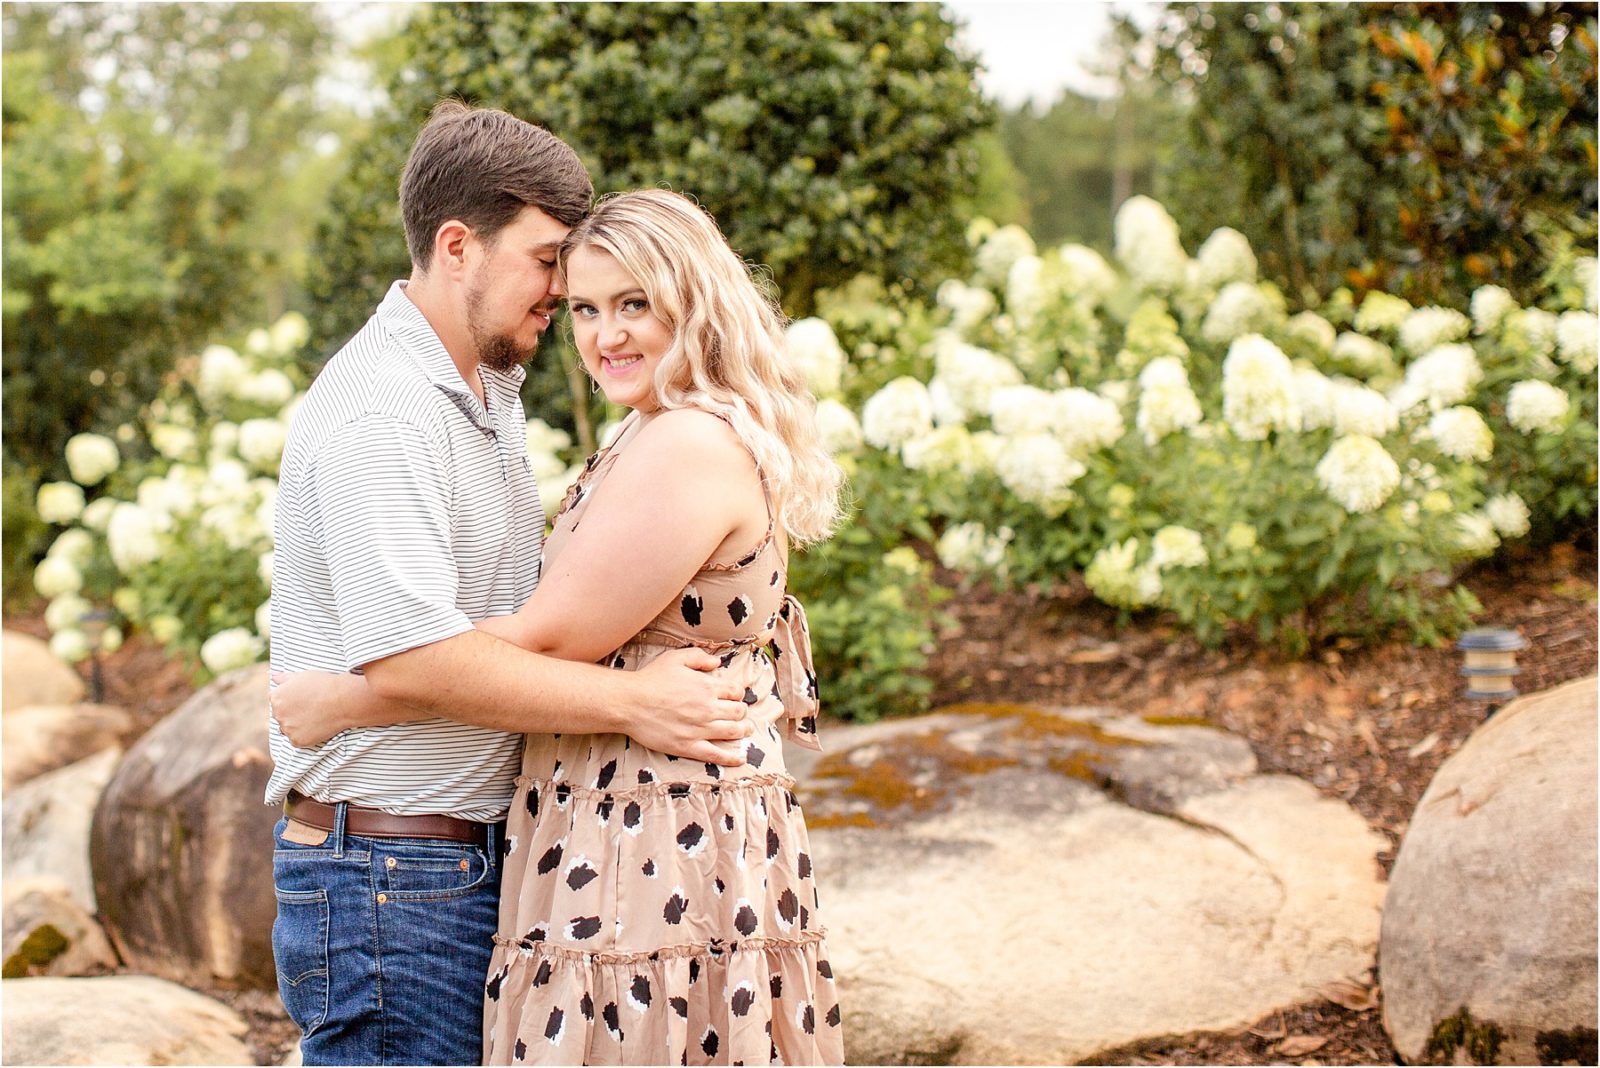 Guy and girl during engagement session